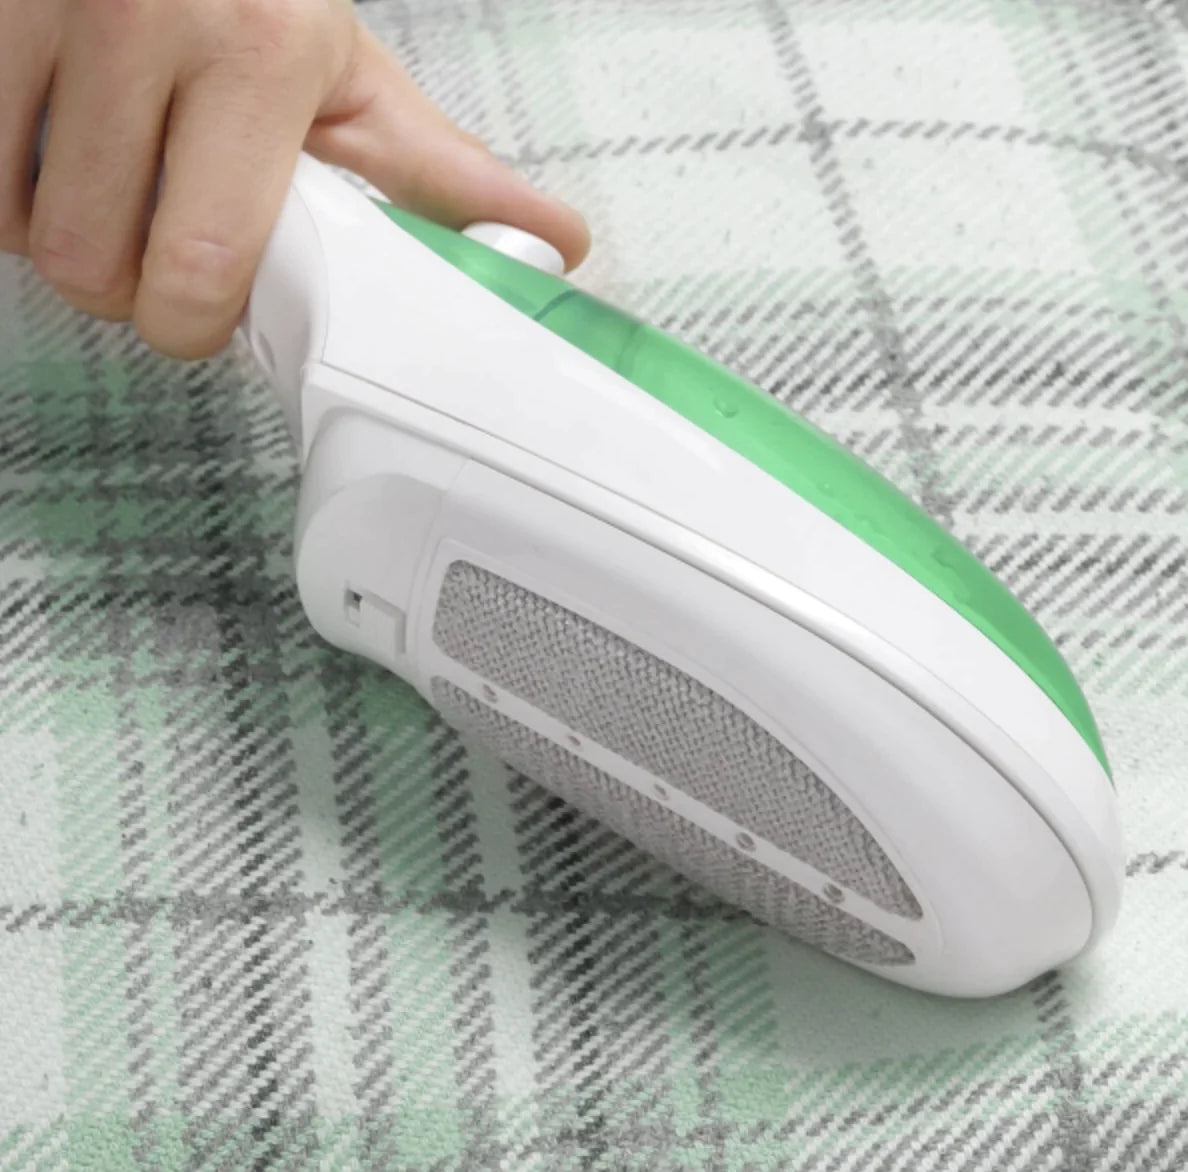 Smart steam iron for on the go.